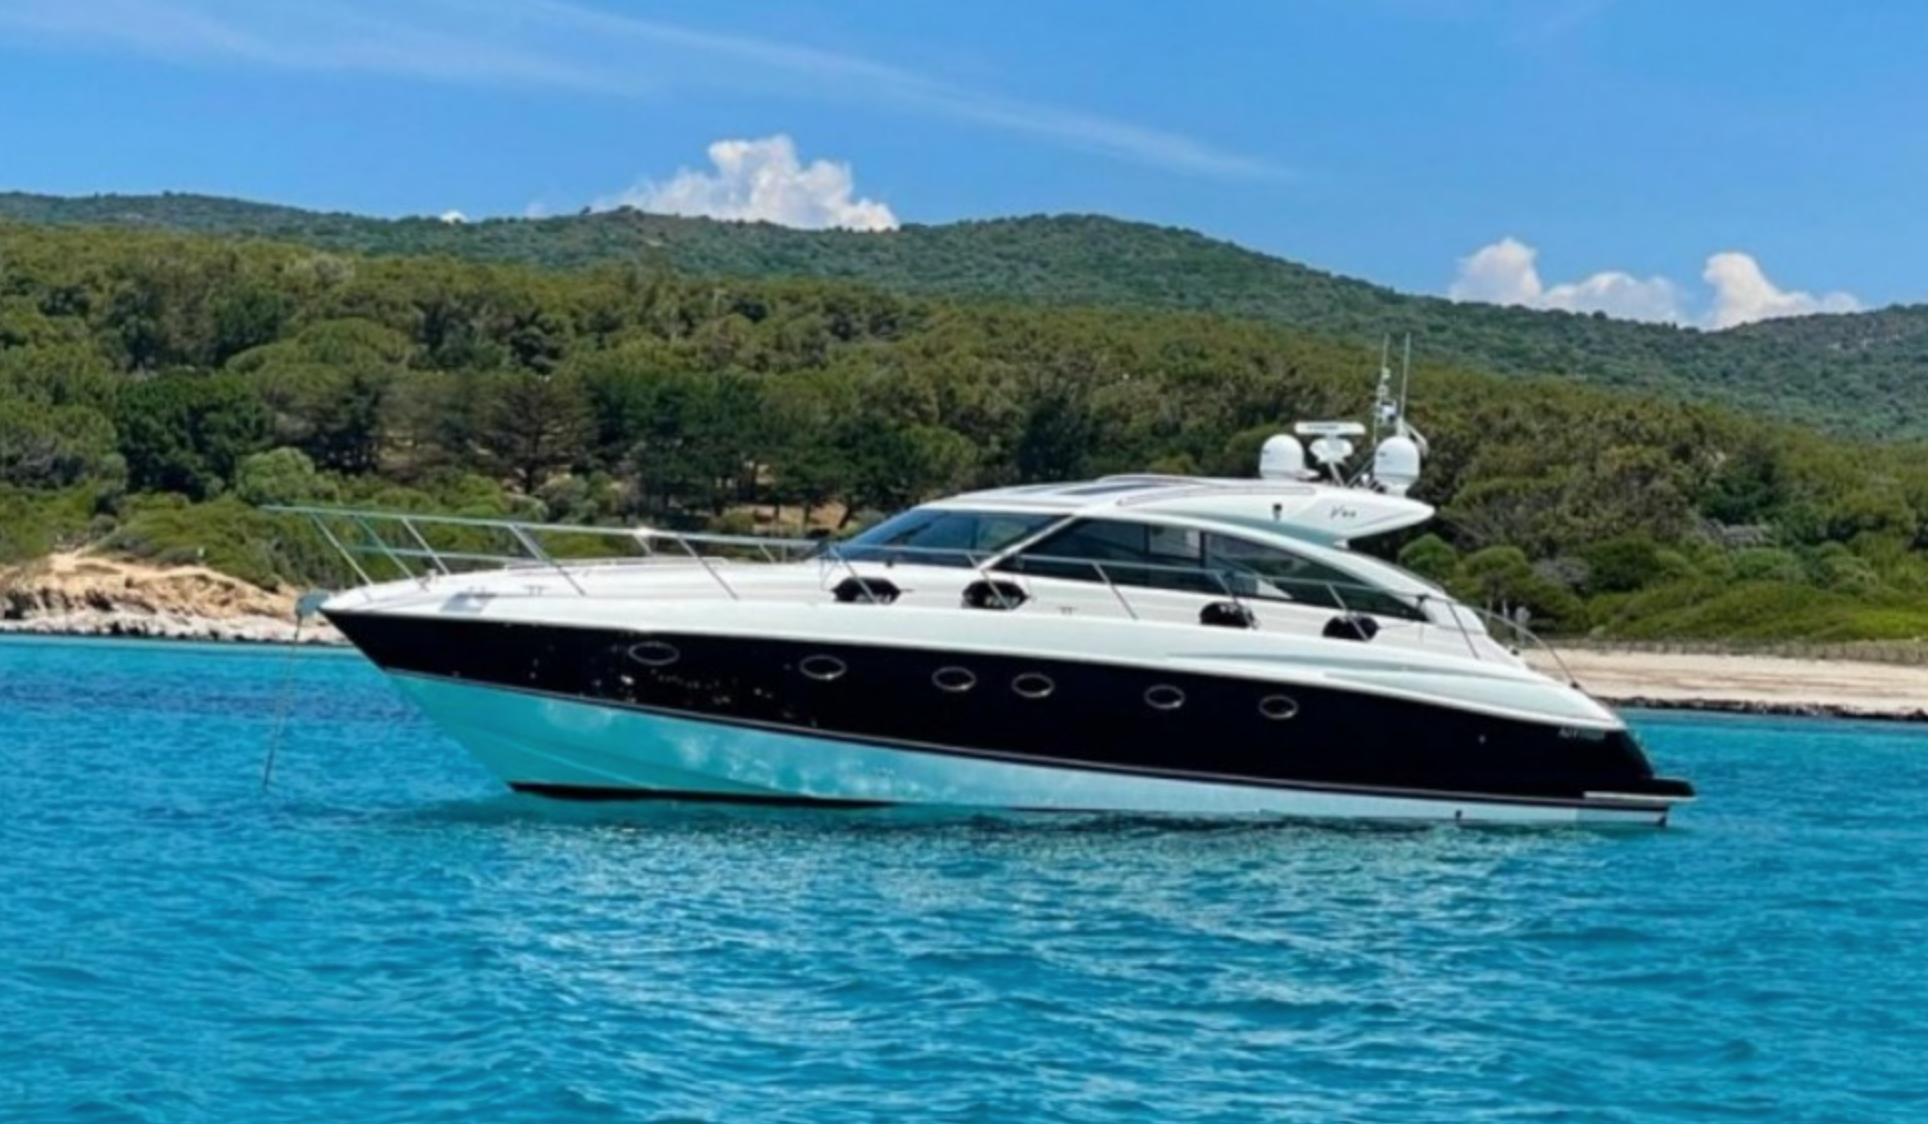  French Riviera Yacht for Rent